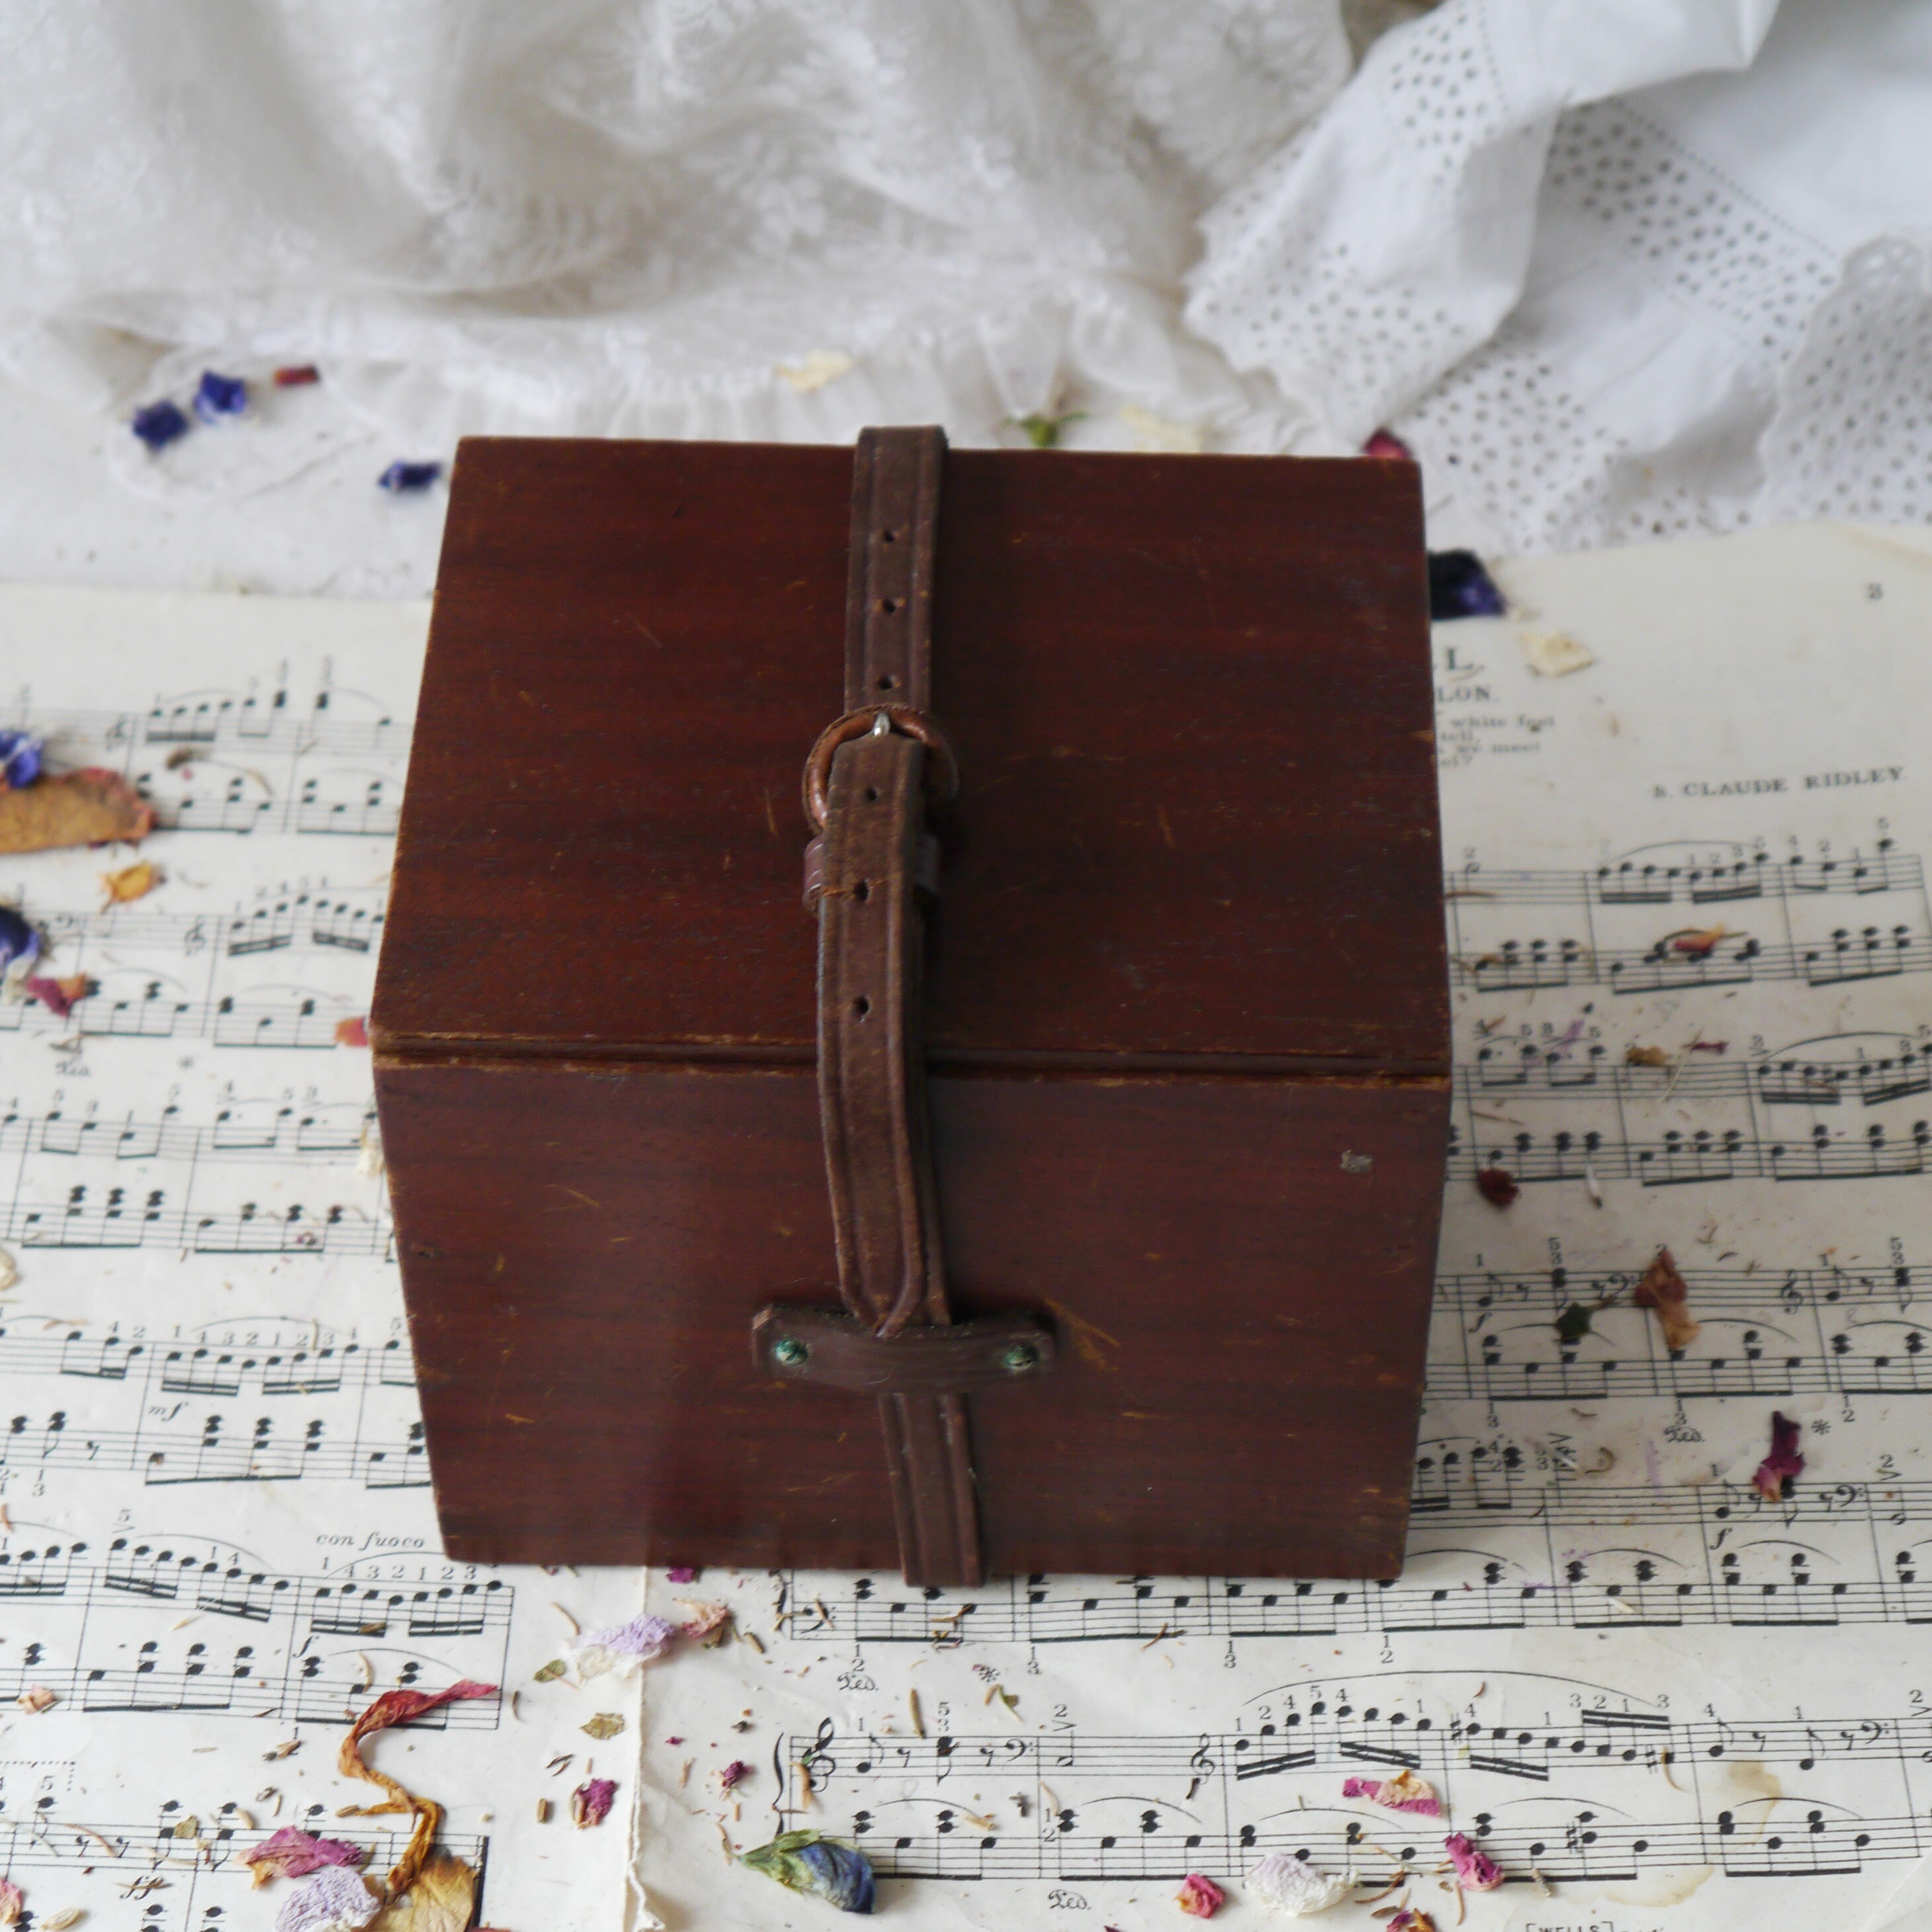 Small Vintage Wooden Box With Leather Strap Fastener 